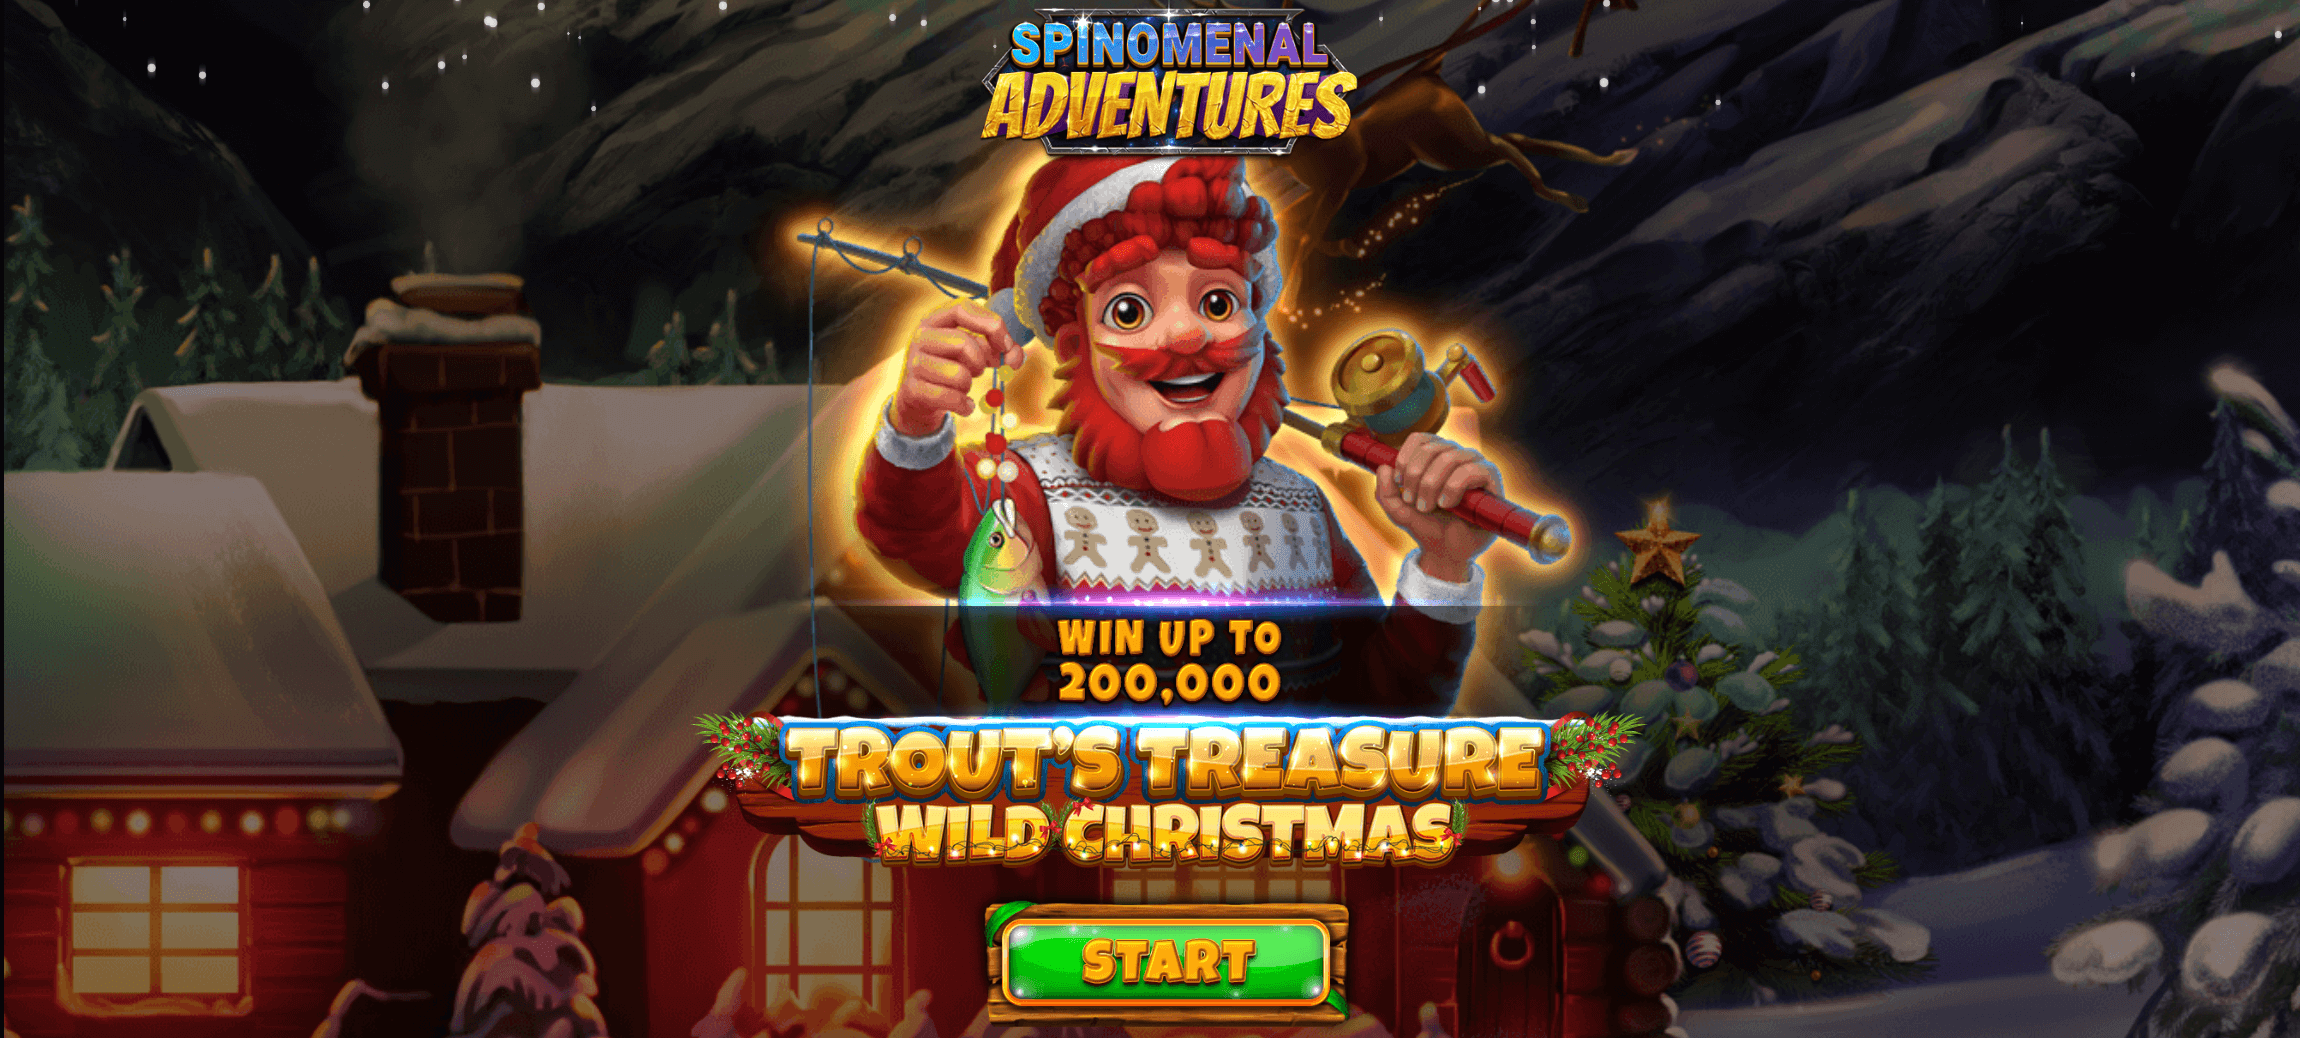 Trout's Treasure   Wild Christmas Slot by Spinomenal